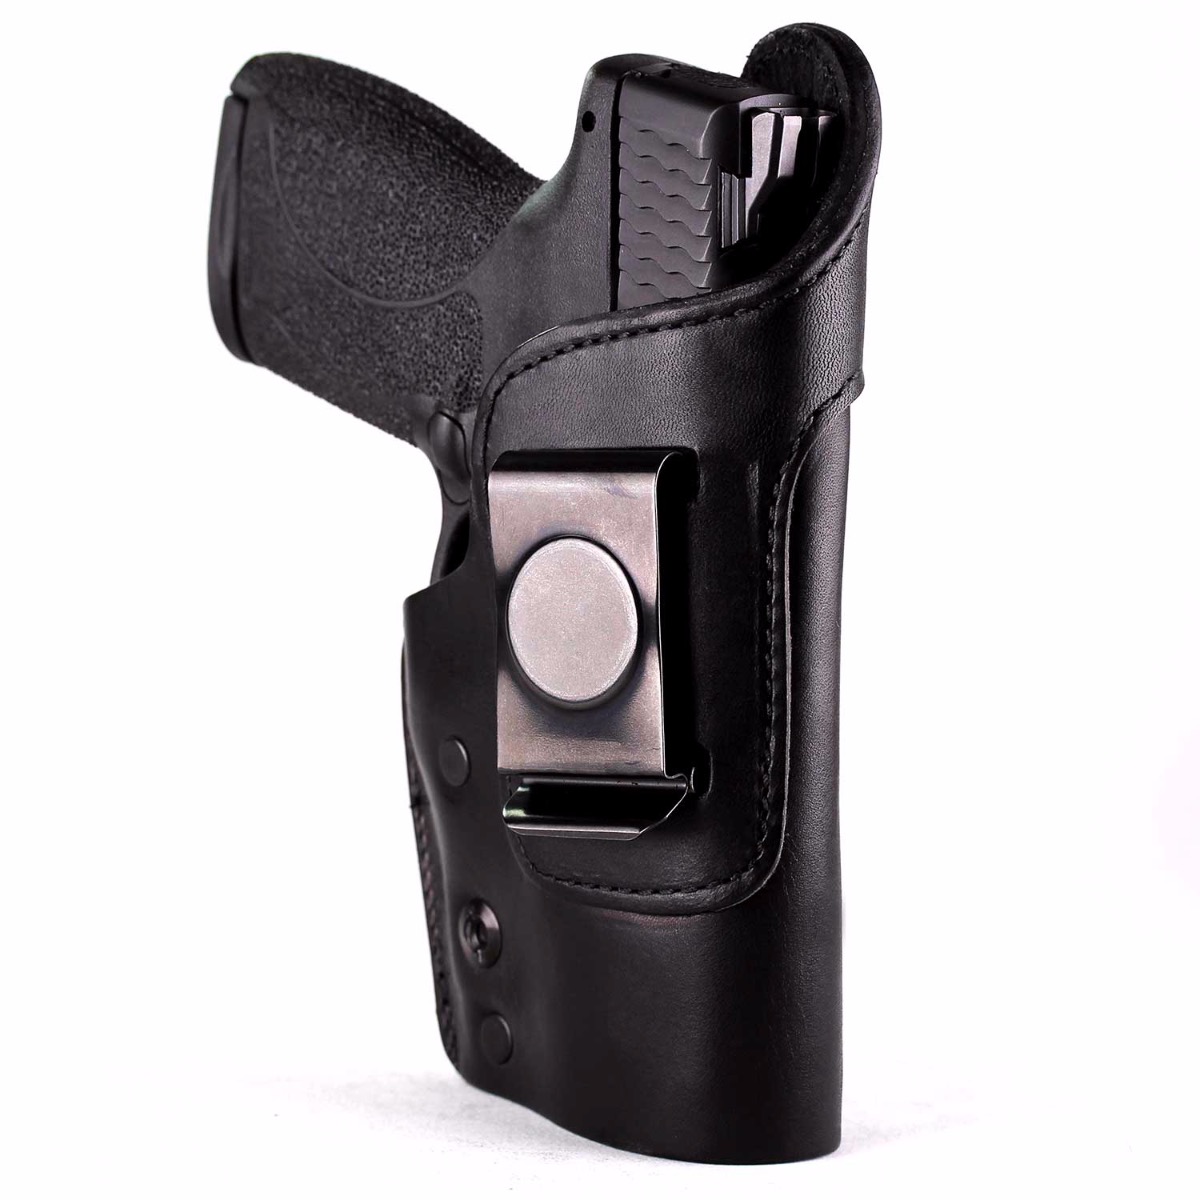 IWB HOLSTER W/ CLIP. INSIDE THE WAISTBAND LEATHER HOLSTER FOR SIG SAUER P239 